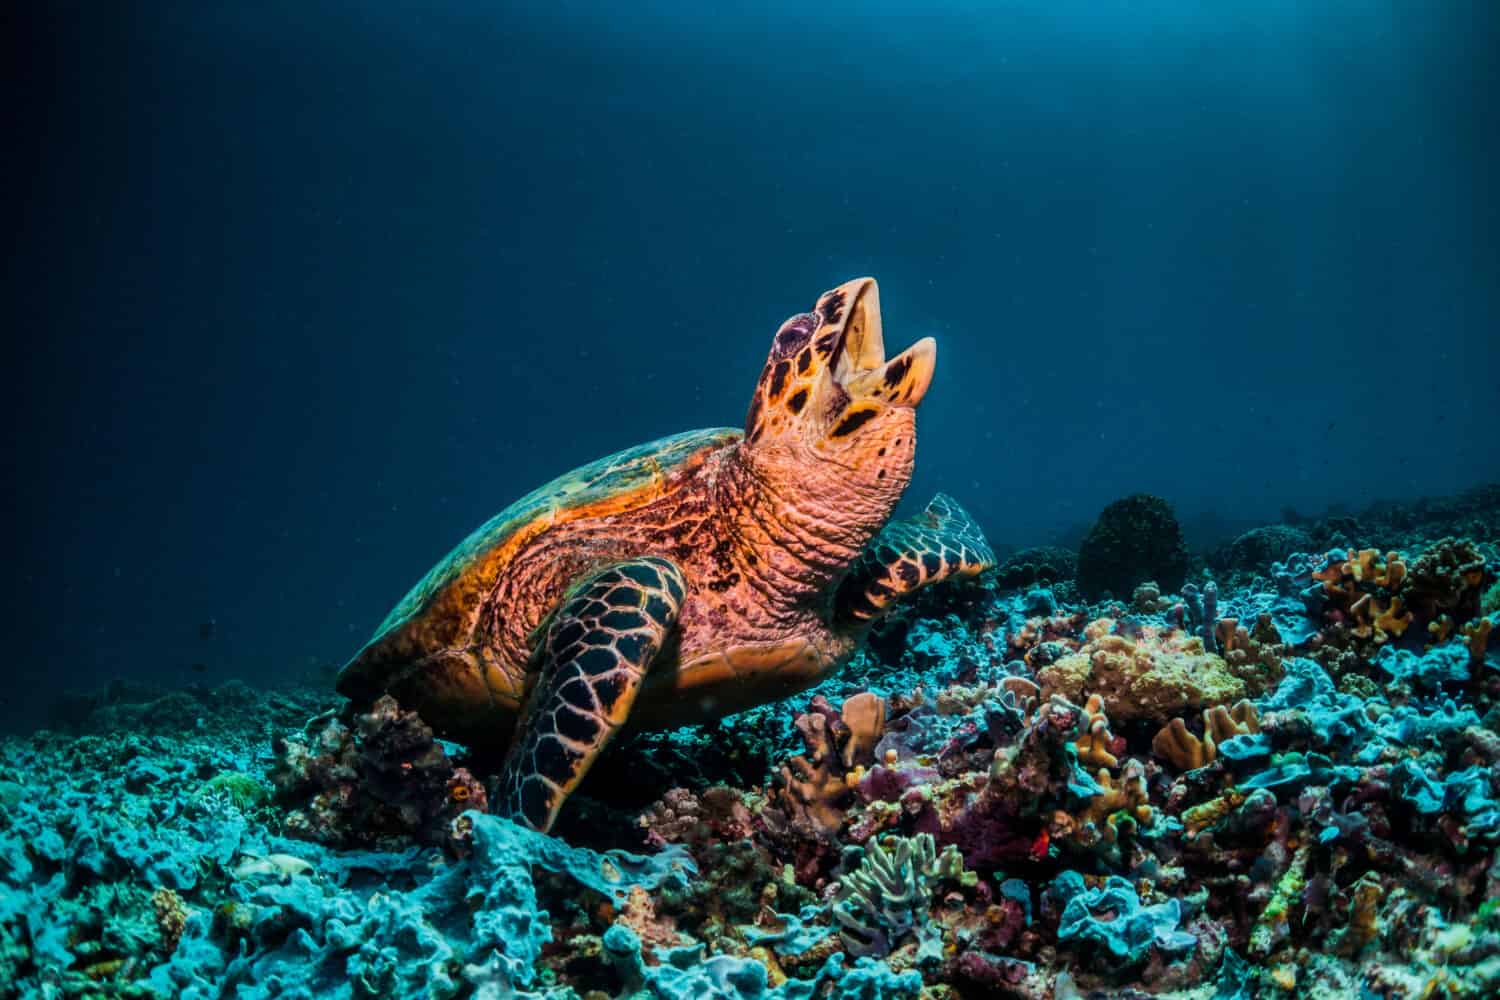 Large sea turtle resting on coral reef looking up towards the surface with its mouth wide open. Plain dark blue background